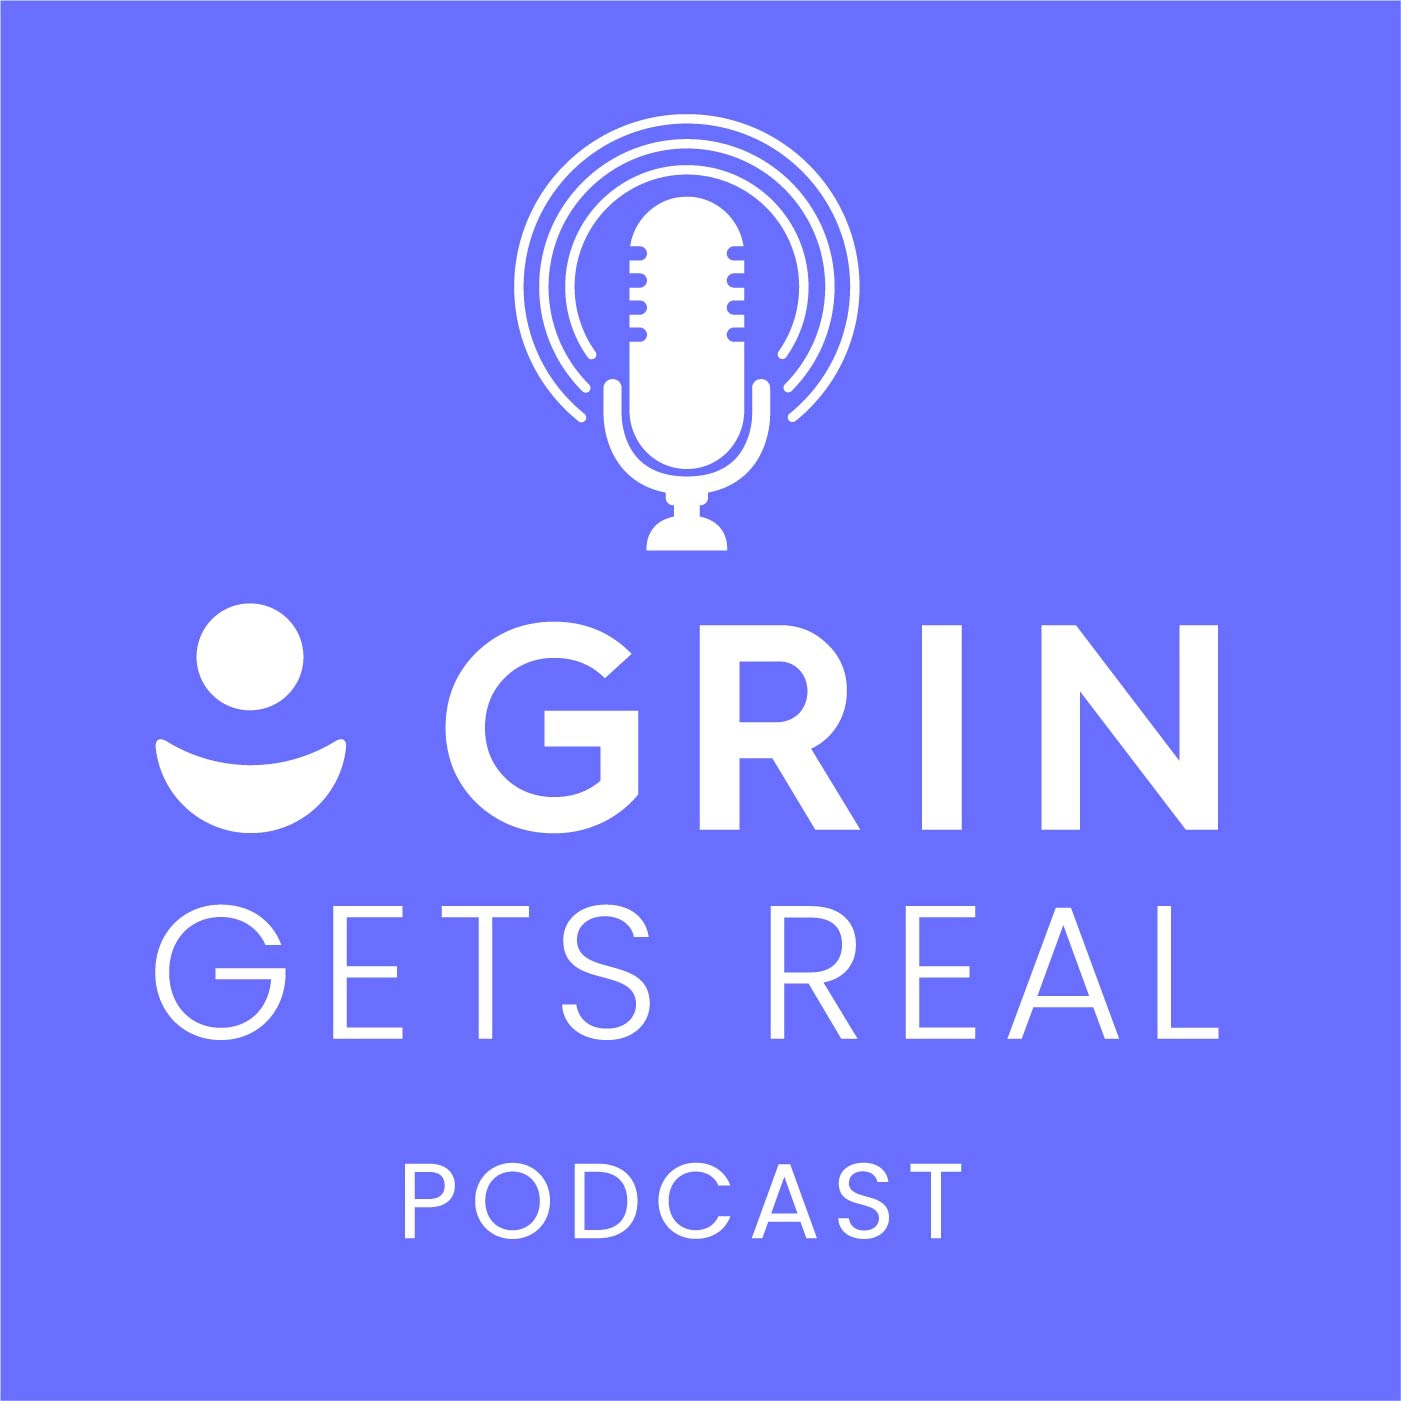 Grin Gets Real Podcast logo